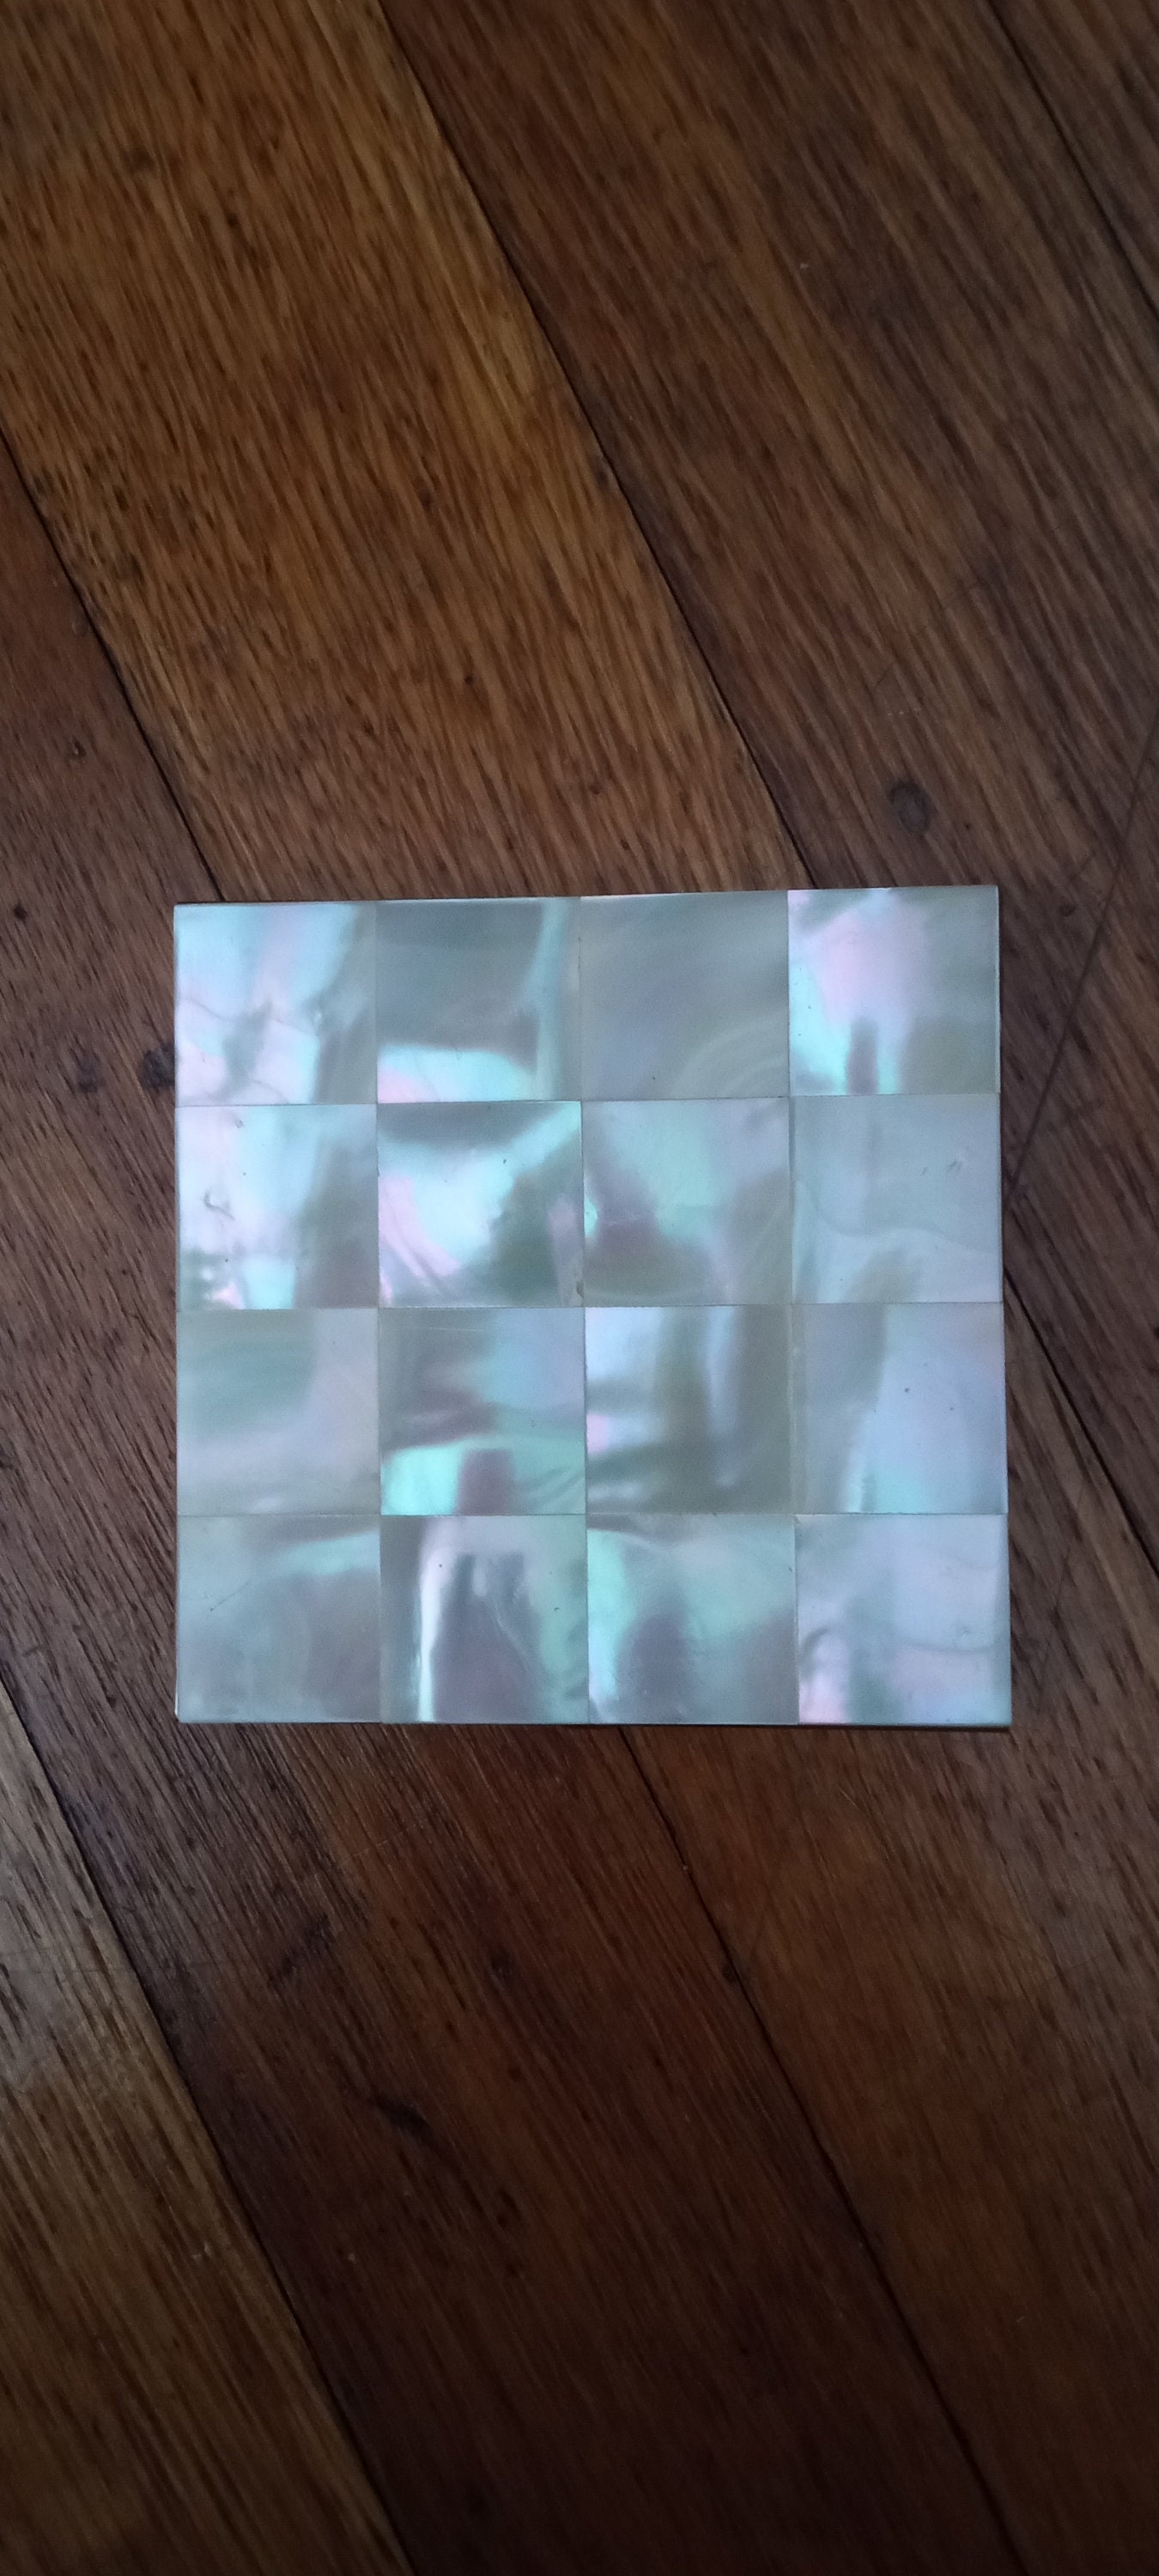 24 Mirror Tile Small Squares 3/4 X 3/4 Inch Square Shaped Glass